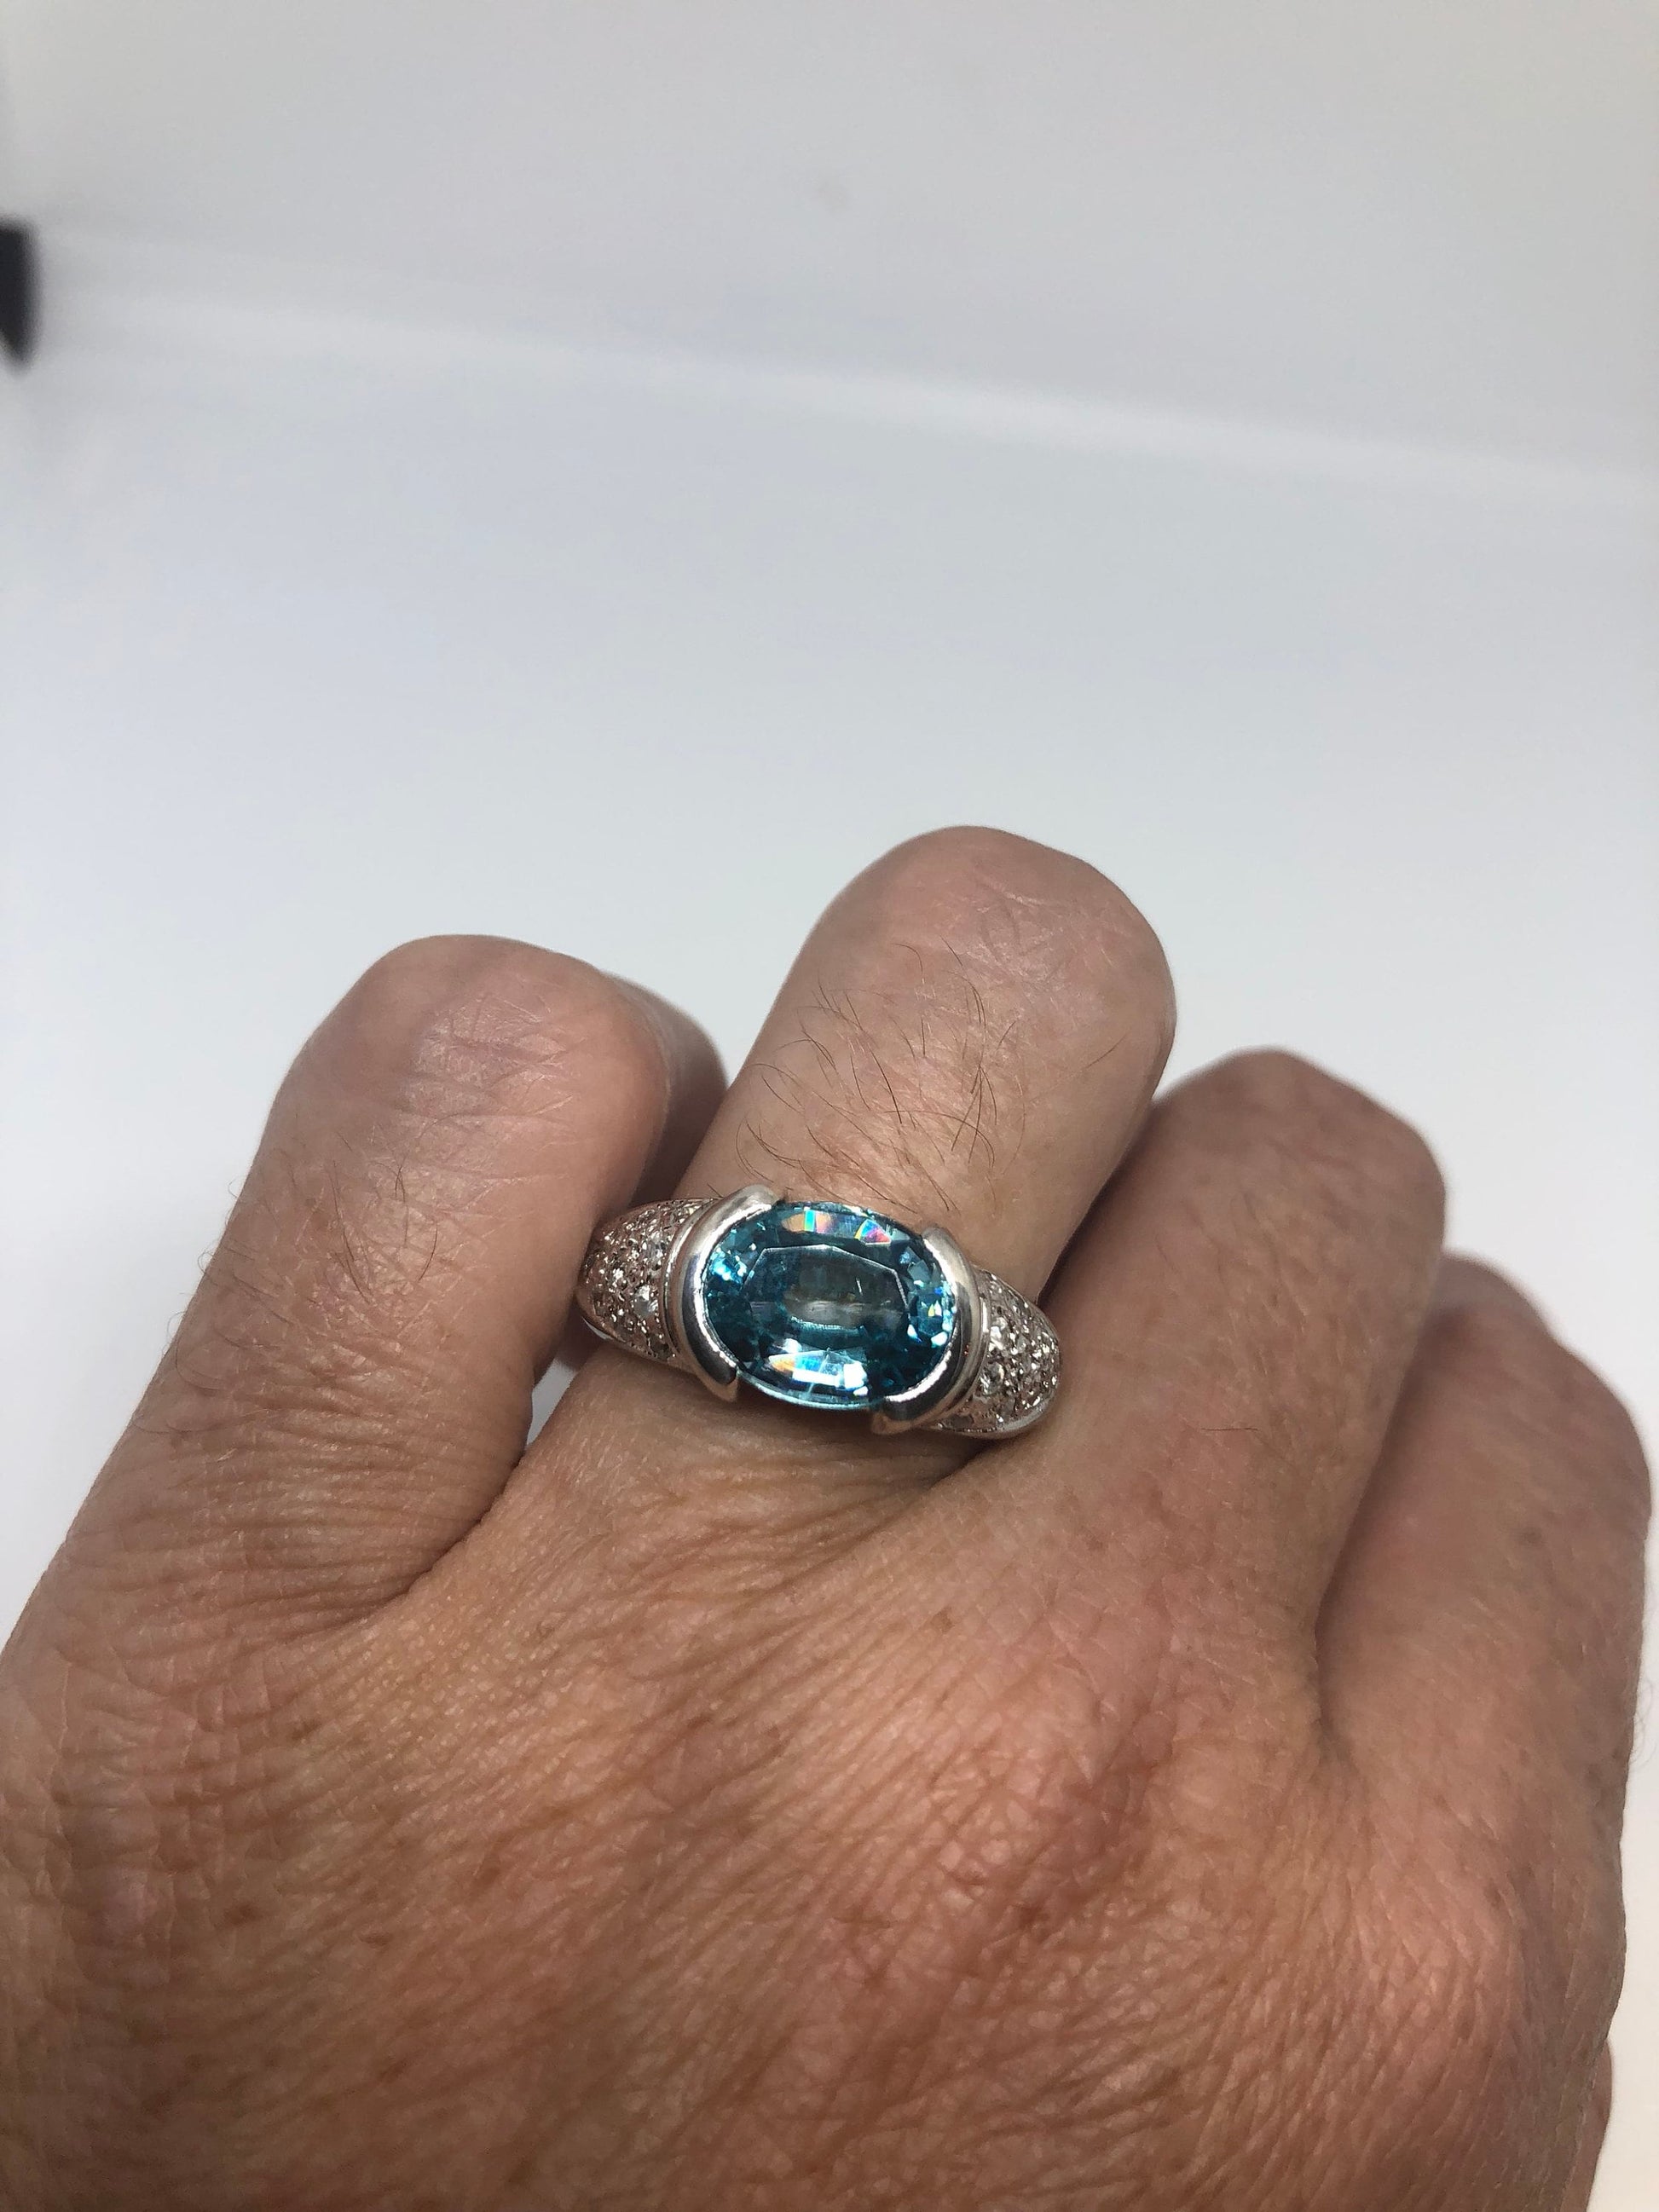 Vintage geniune blue topaz and white sapphire 925 sterling silver rhodium Ring